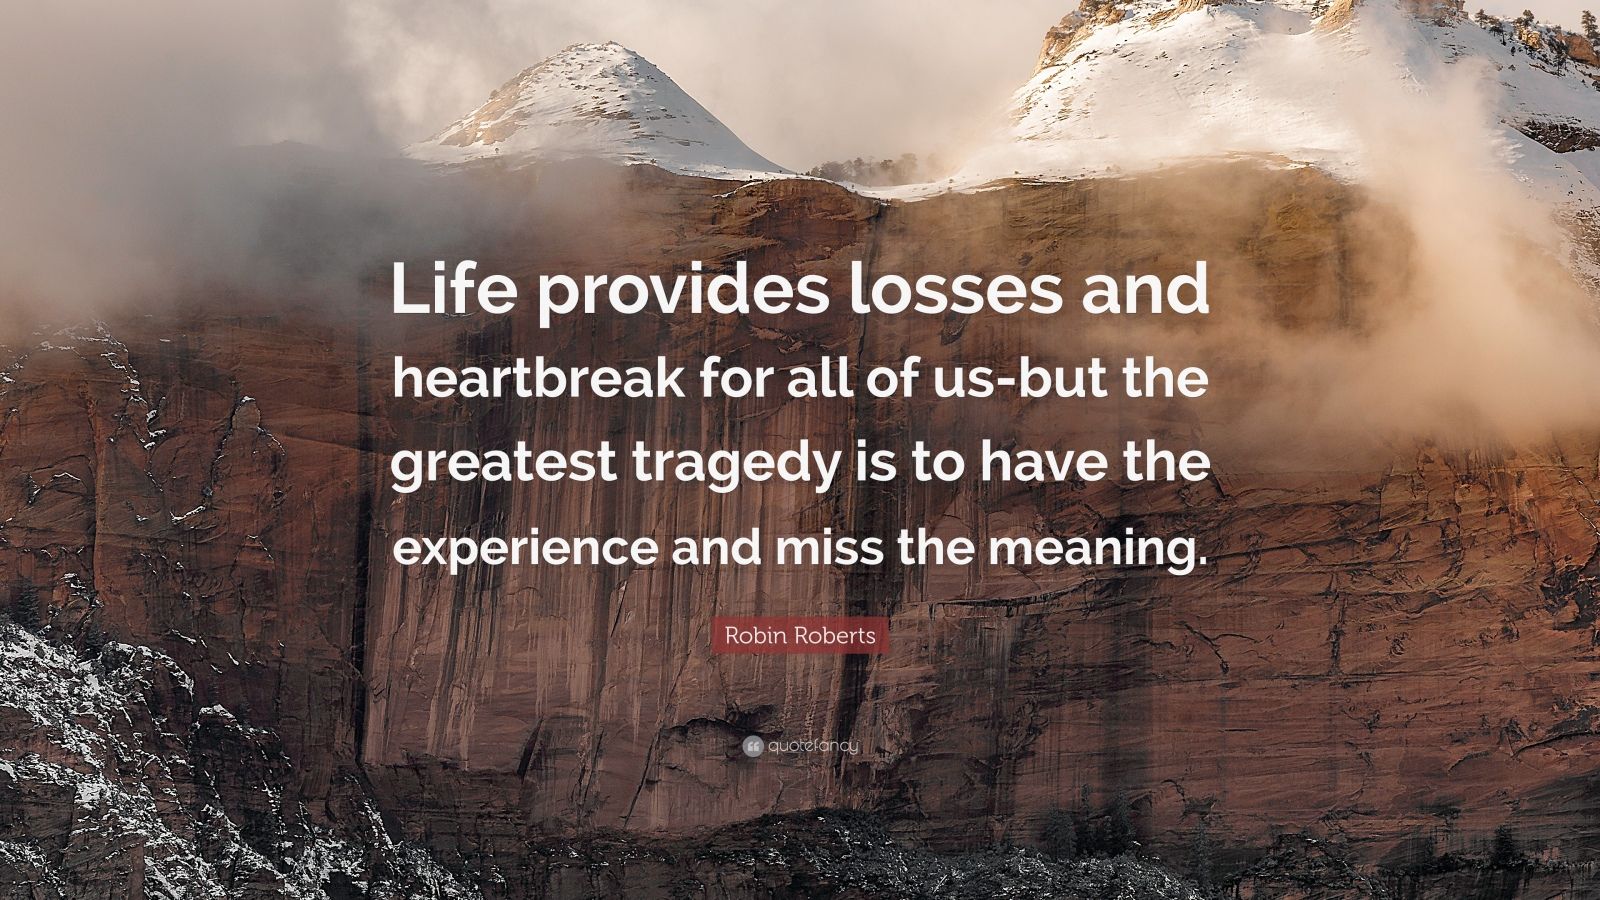 Robin Roberts Quote: “Life provides losses and heartbreak for all ...